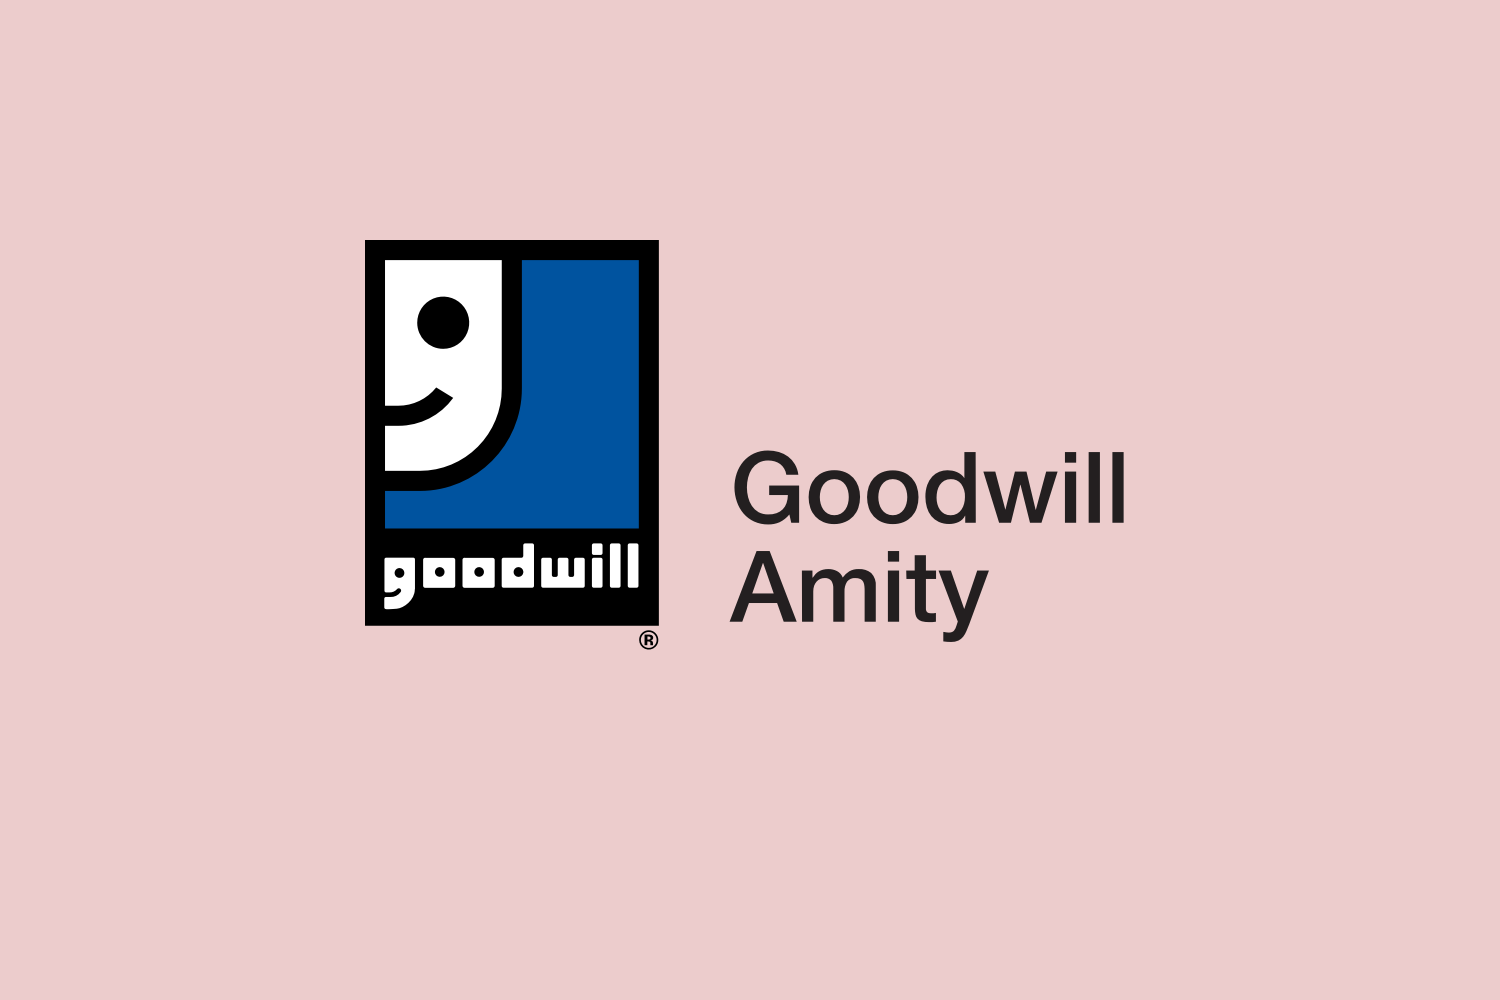 Goodwill Amity logo on red background